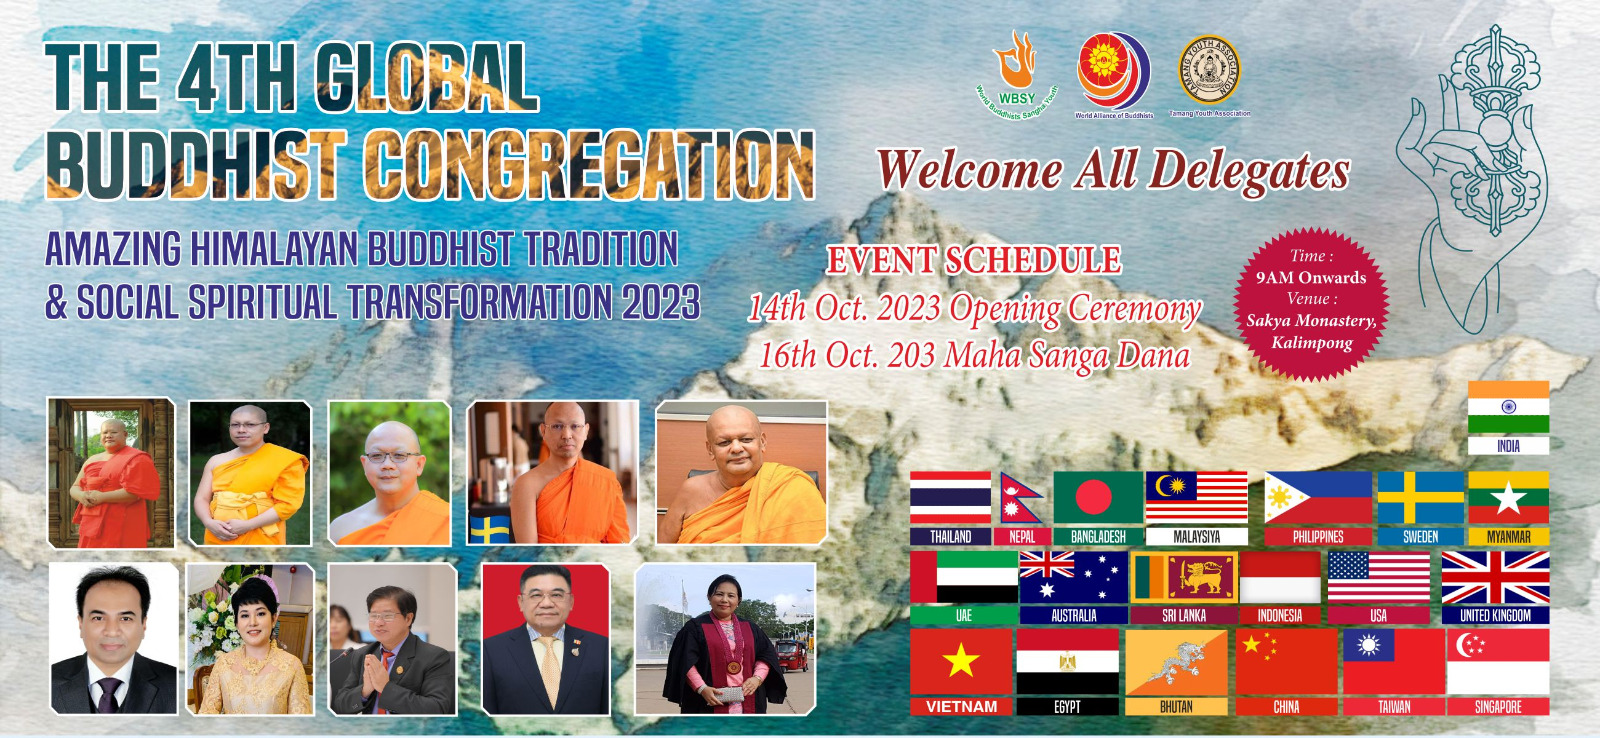 The 4th Global Buddhist Congregation 2023